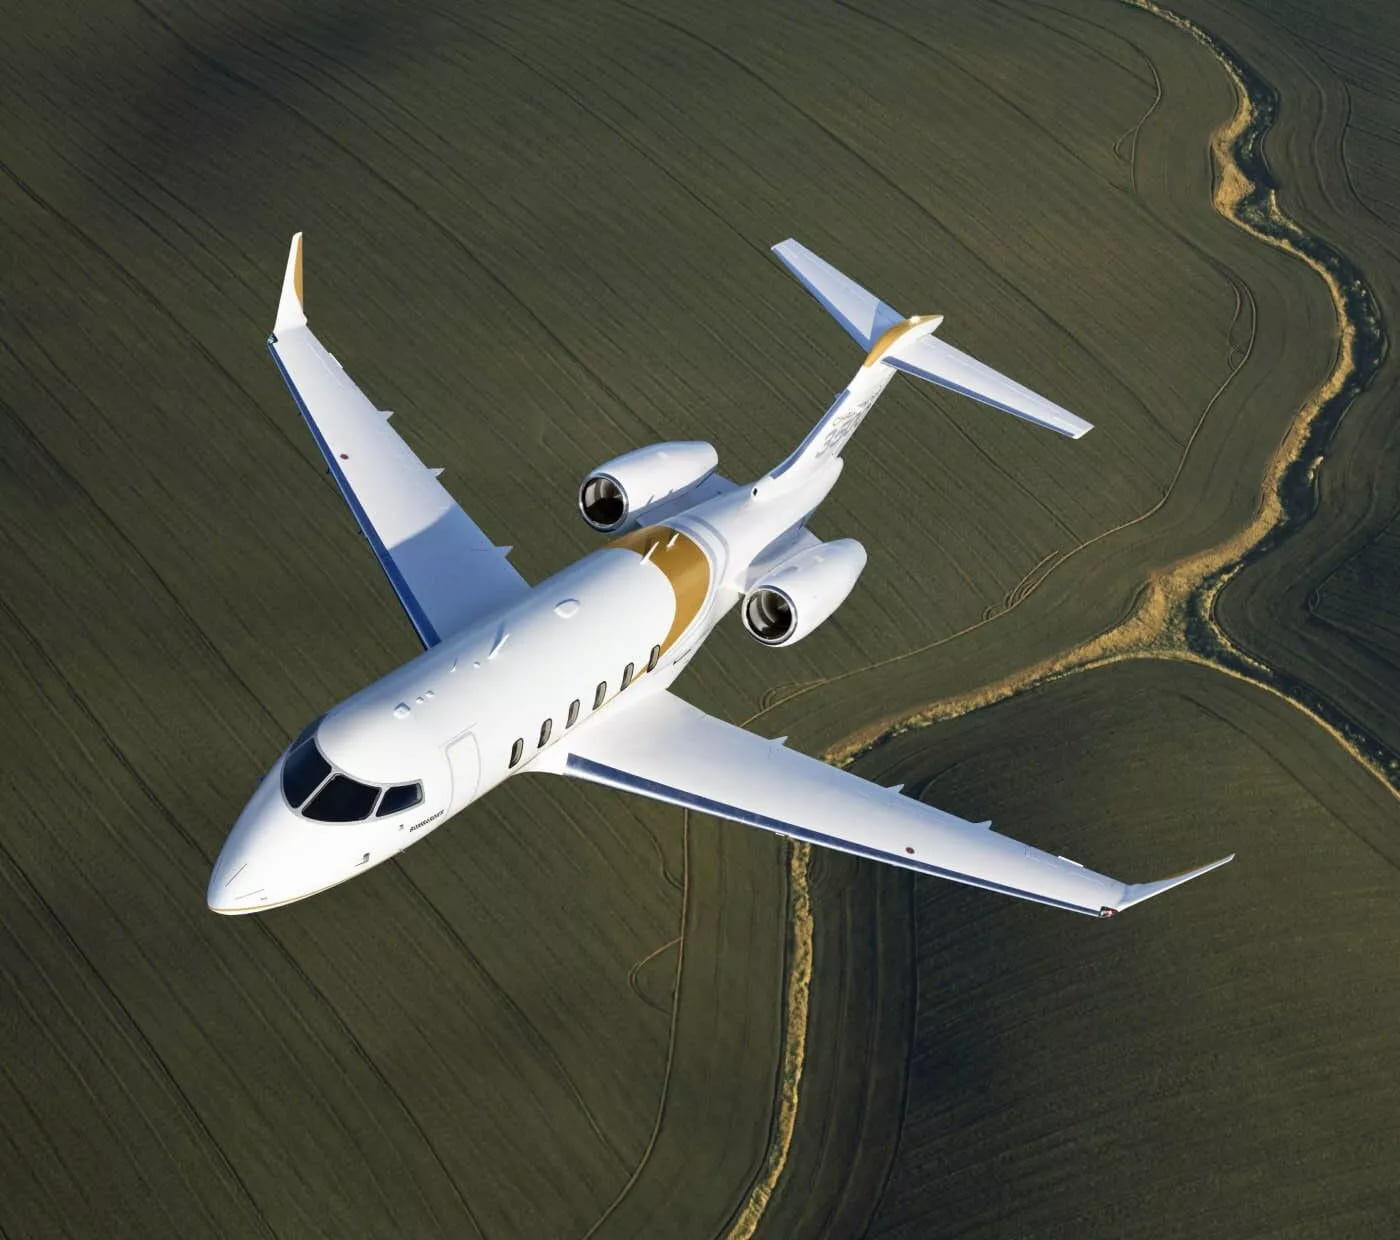 Challenger 3500: Superior comfort, technology, and range, delivering a luxurious and effortless private jet travel experience